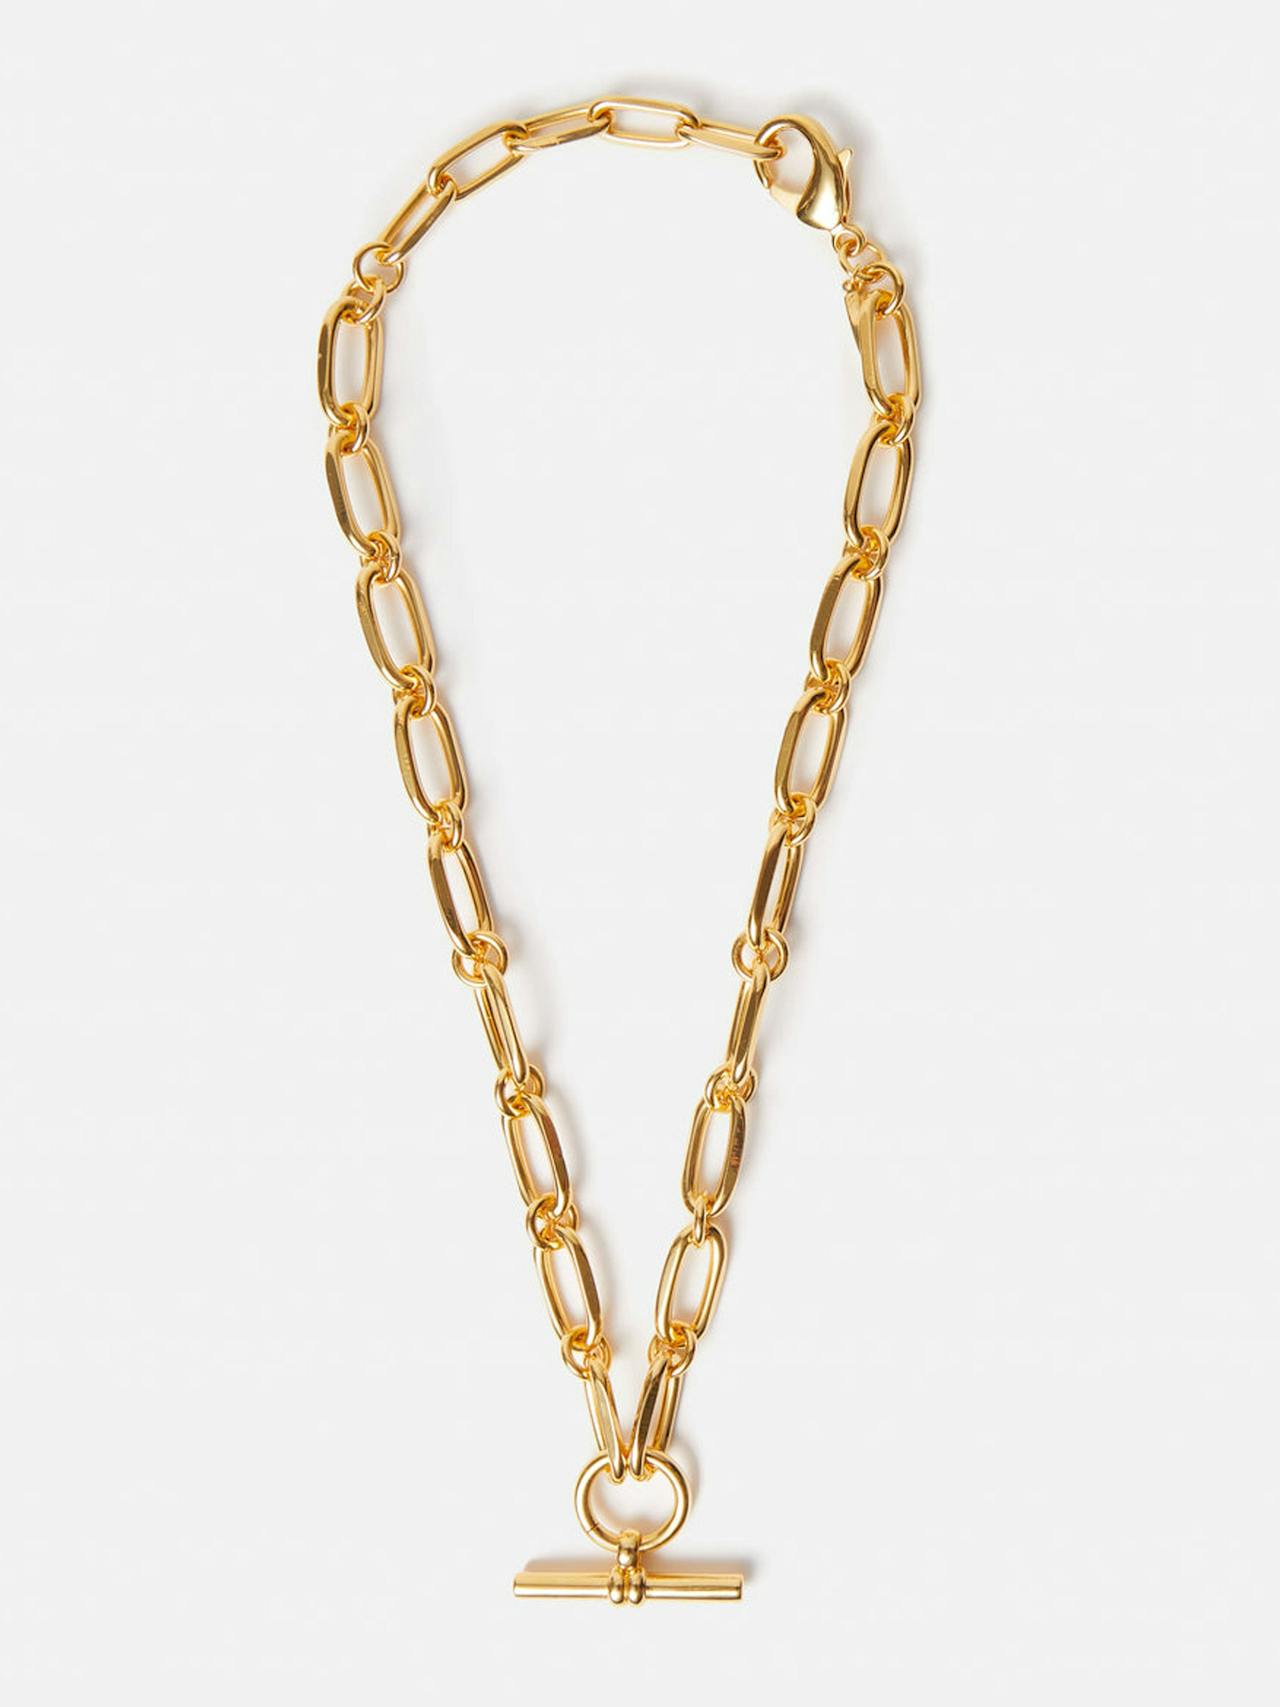 Trombone link chain necklace